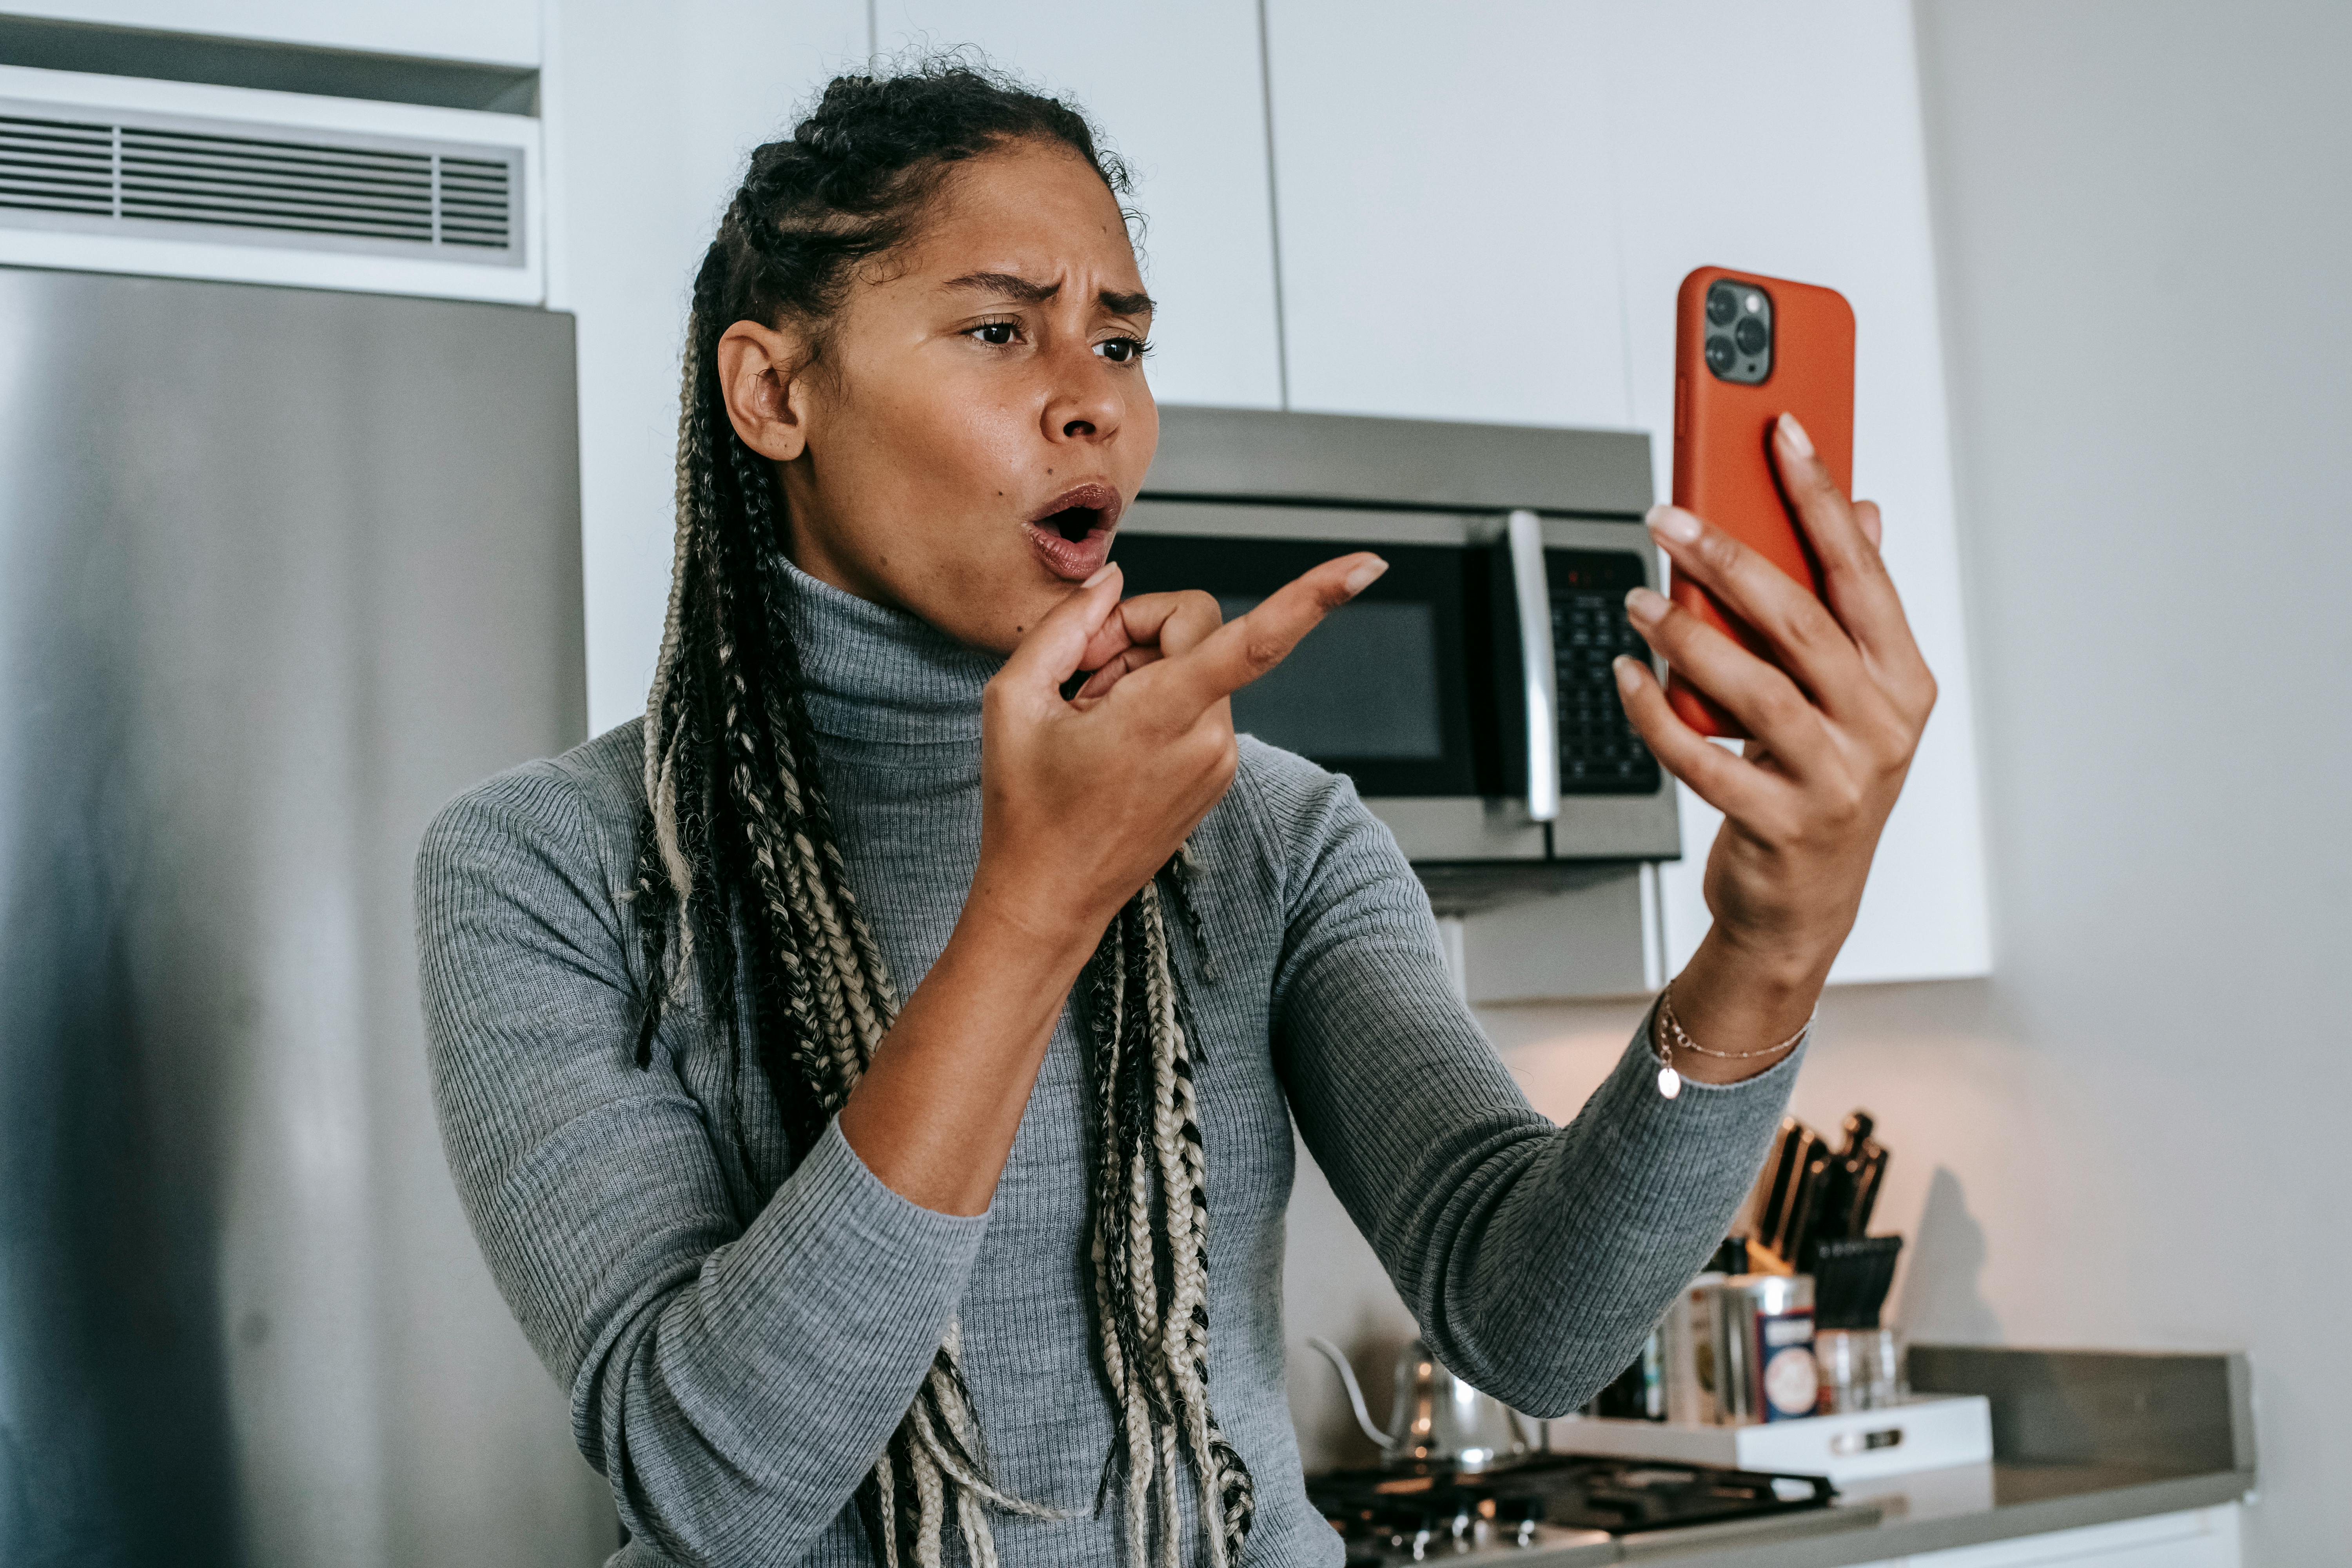 An upset woman gesturing with her hand to her phone | Source: Pexels